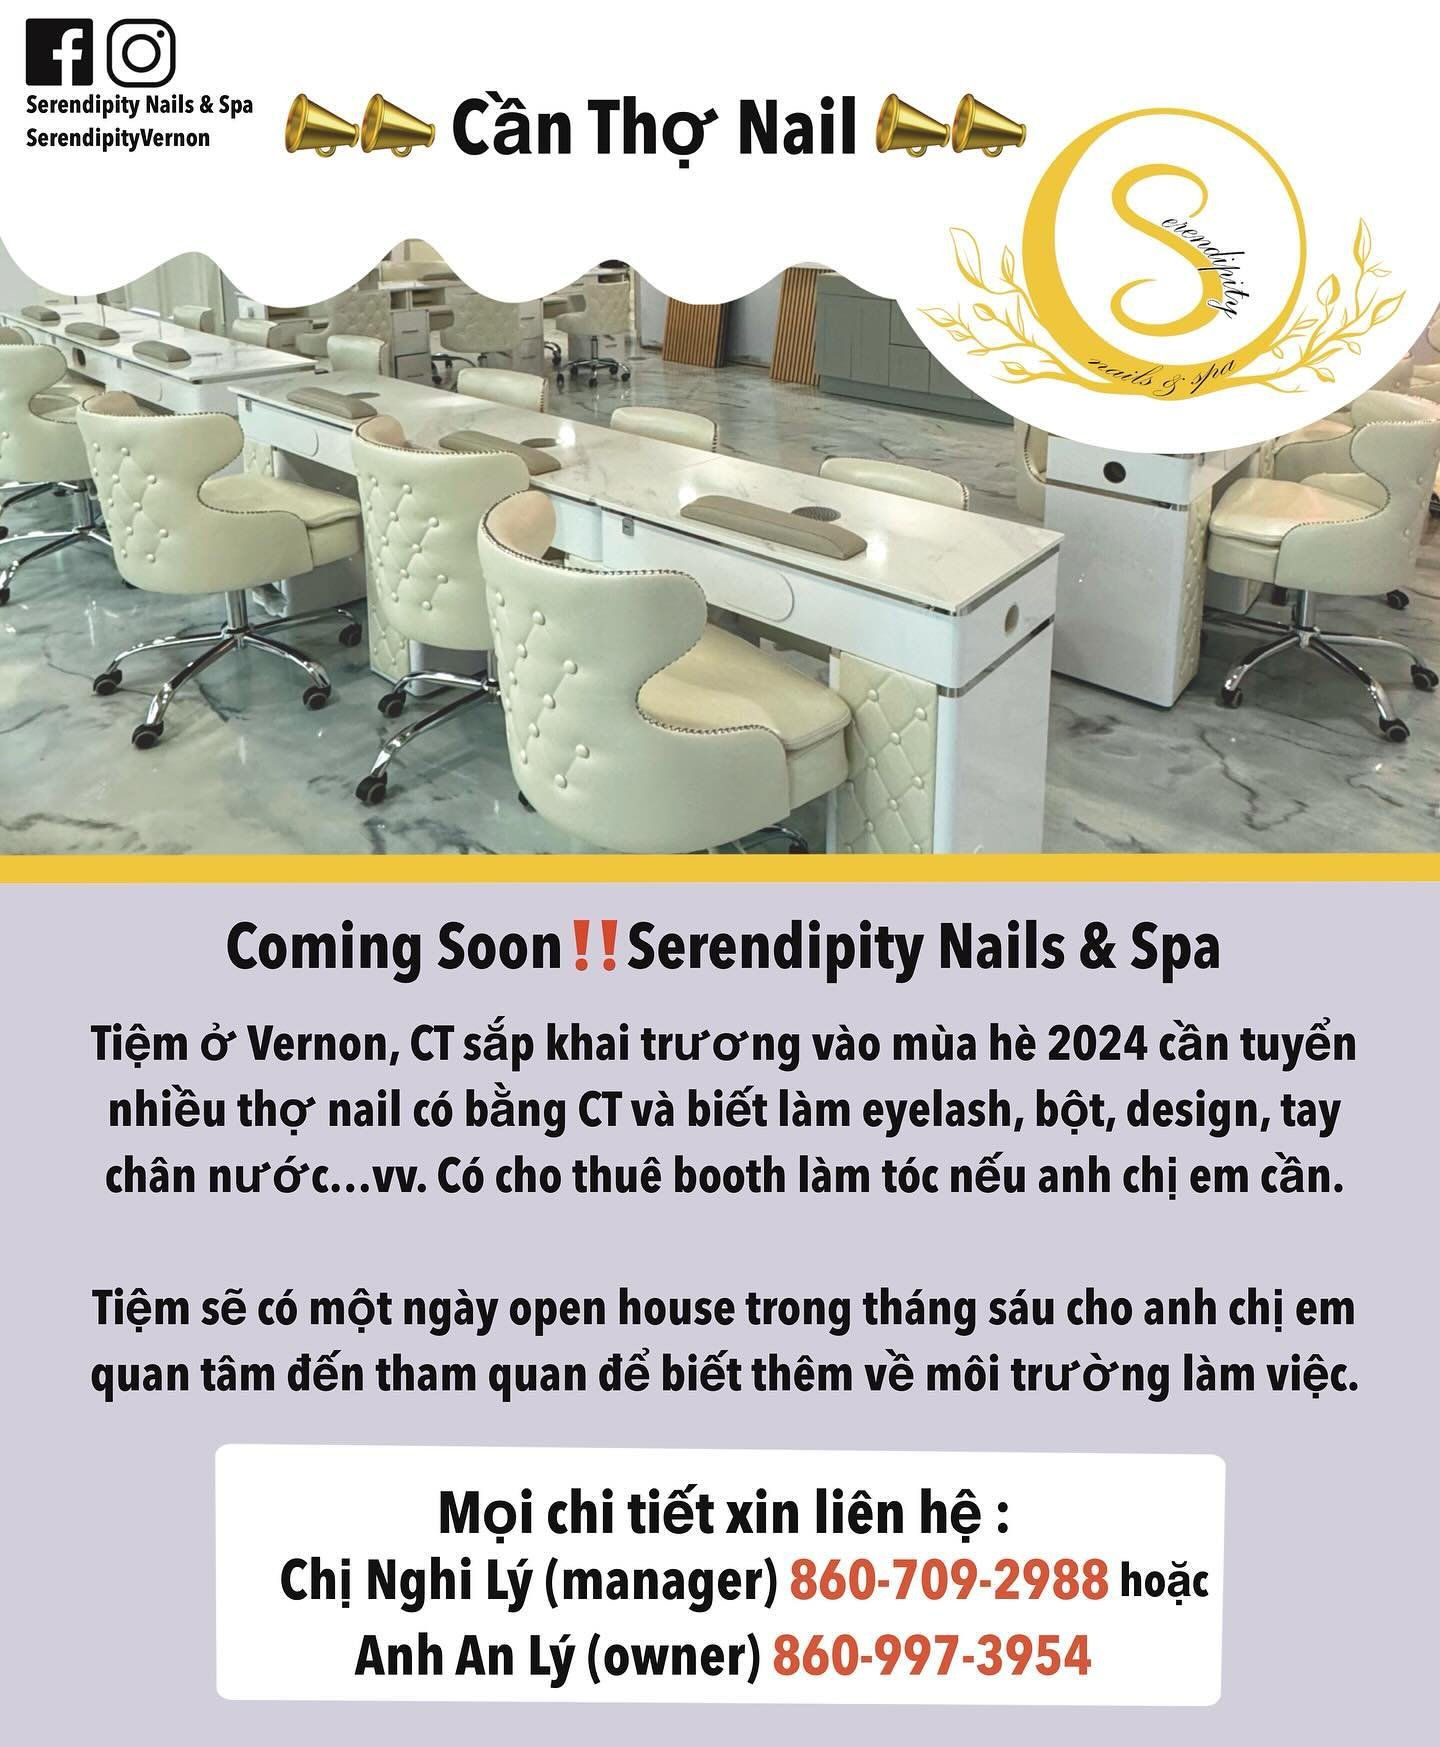 🚨🚨HIRING: CERTIFIED TECHNICIANS🚨🚨
Please either call any of the numbers listed above, DM our Instagram @serendipityvernon, or message our Facebook page at Serendipity Nails &amp; Spa for more information or if interested!!
We can not wait to spea